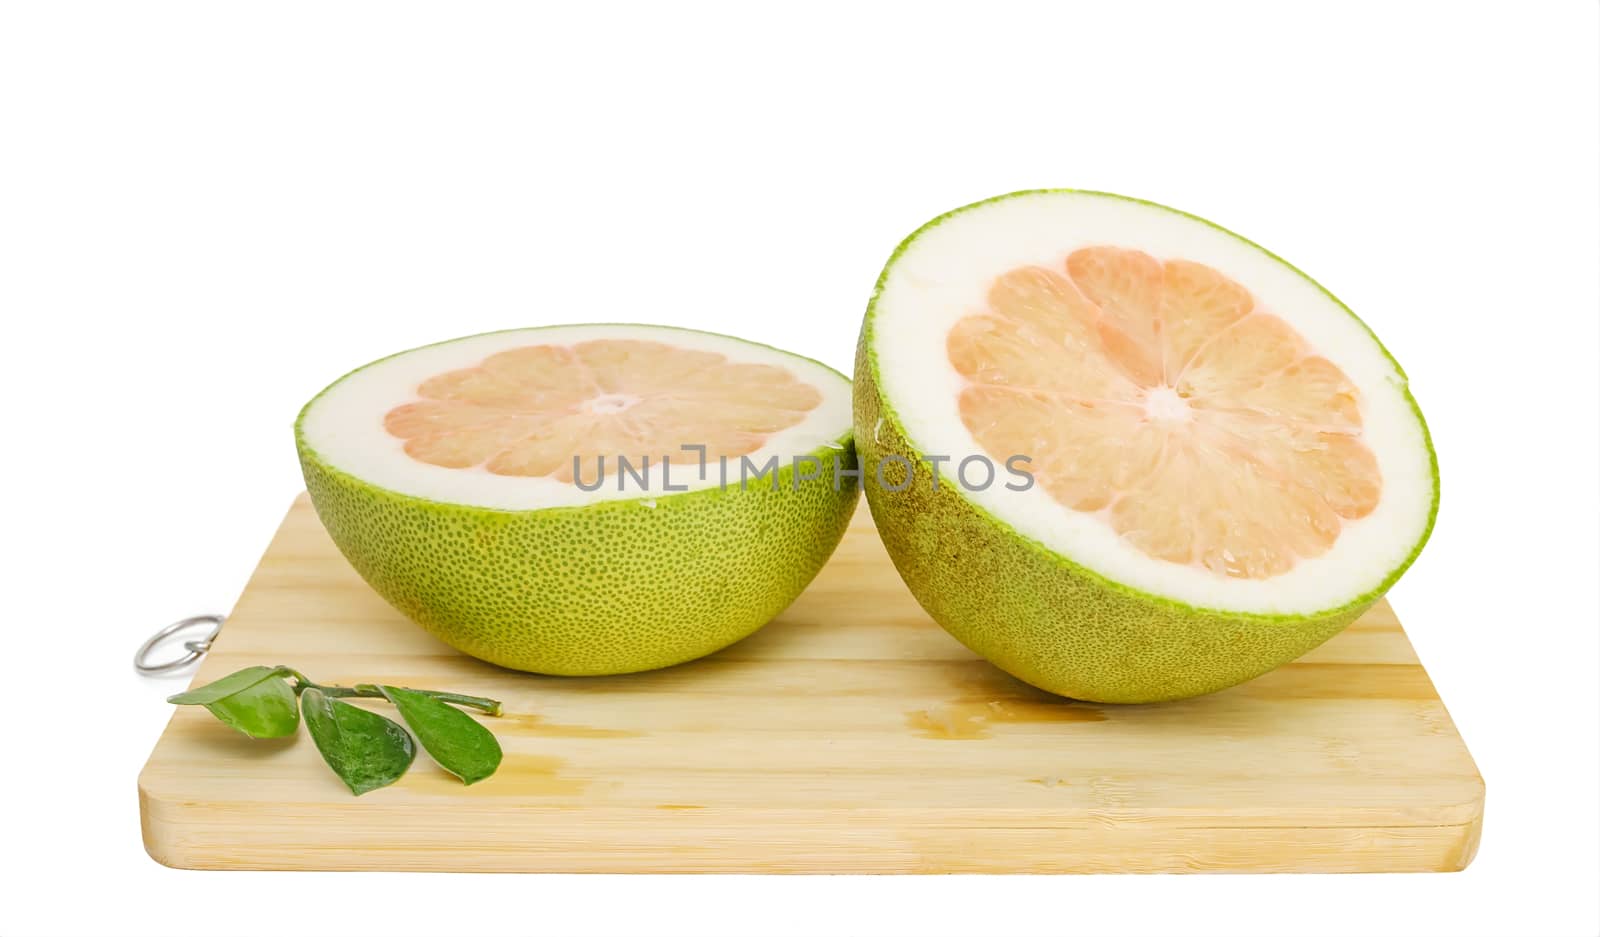 Pomelo or Chinese grapefruit by kefiiir